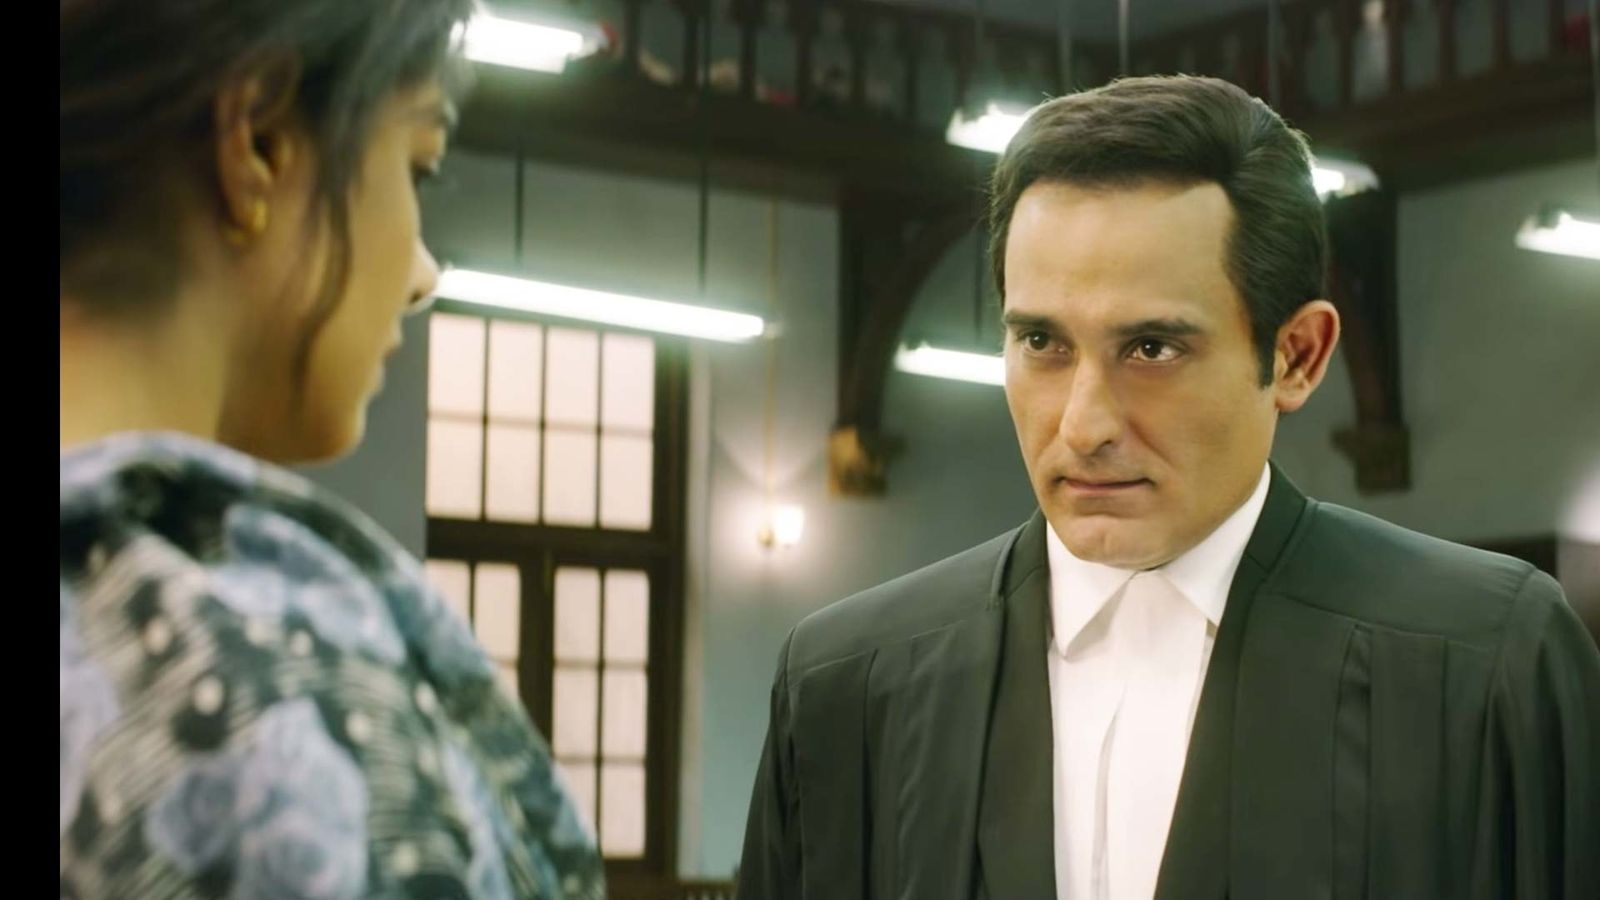 Akshaye Khanna And Makers Of The Film Section 375 Summoned By Pune Court For Showing Lawyers In A Negative Light